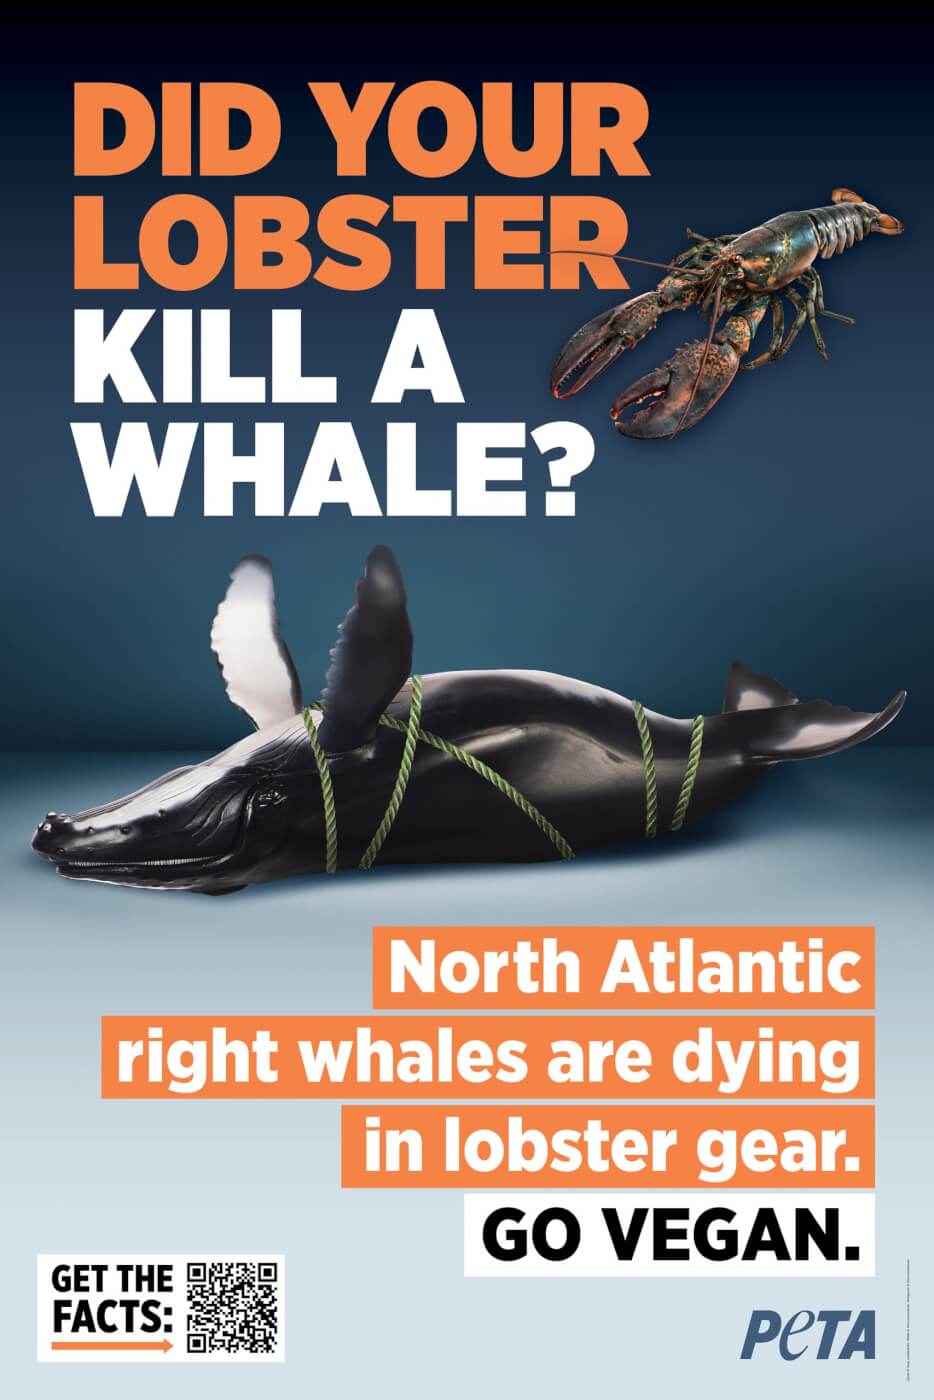 Will Maine Airport Run PETA's Pro-Whale Appeal After Whole Foods' Lobster  Ban?